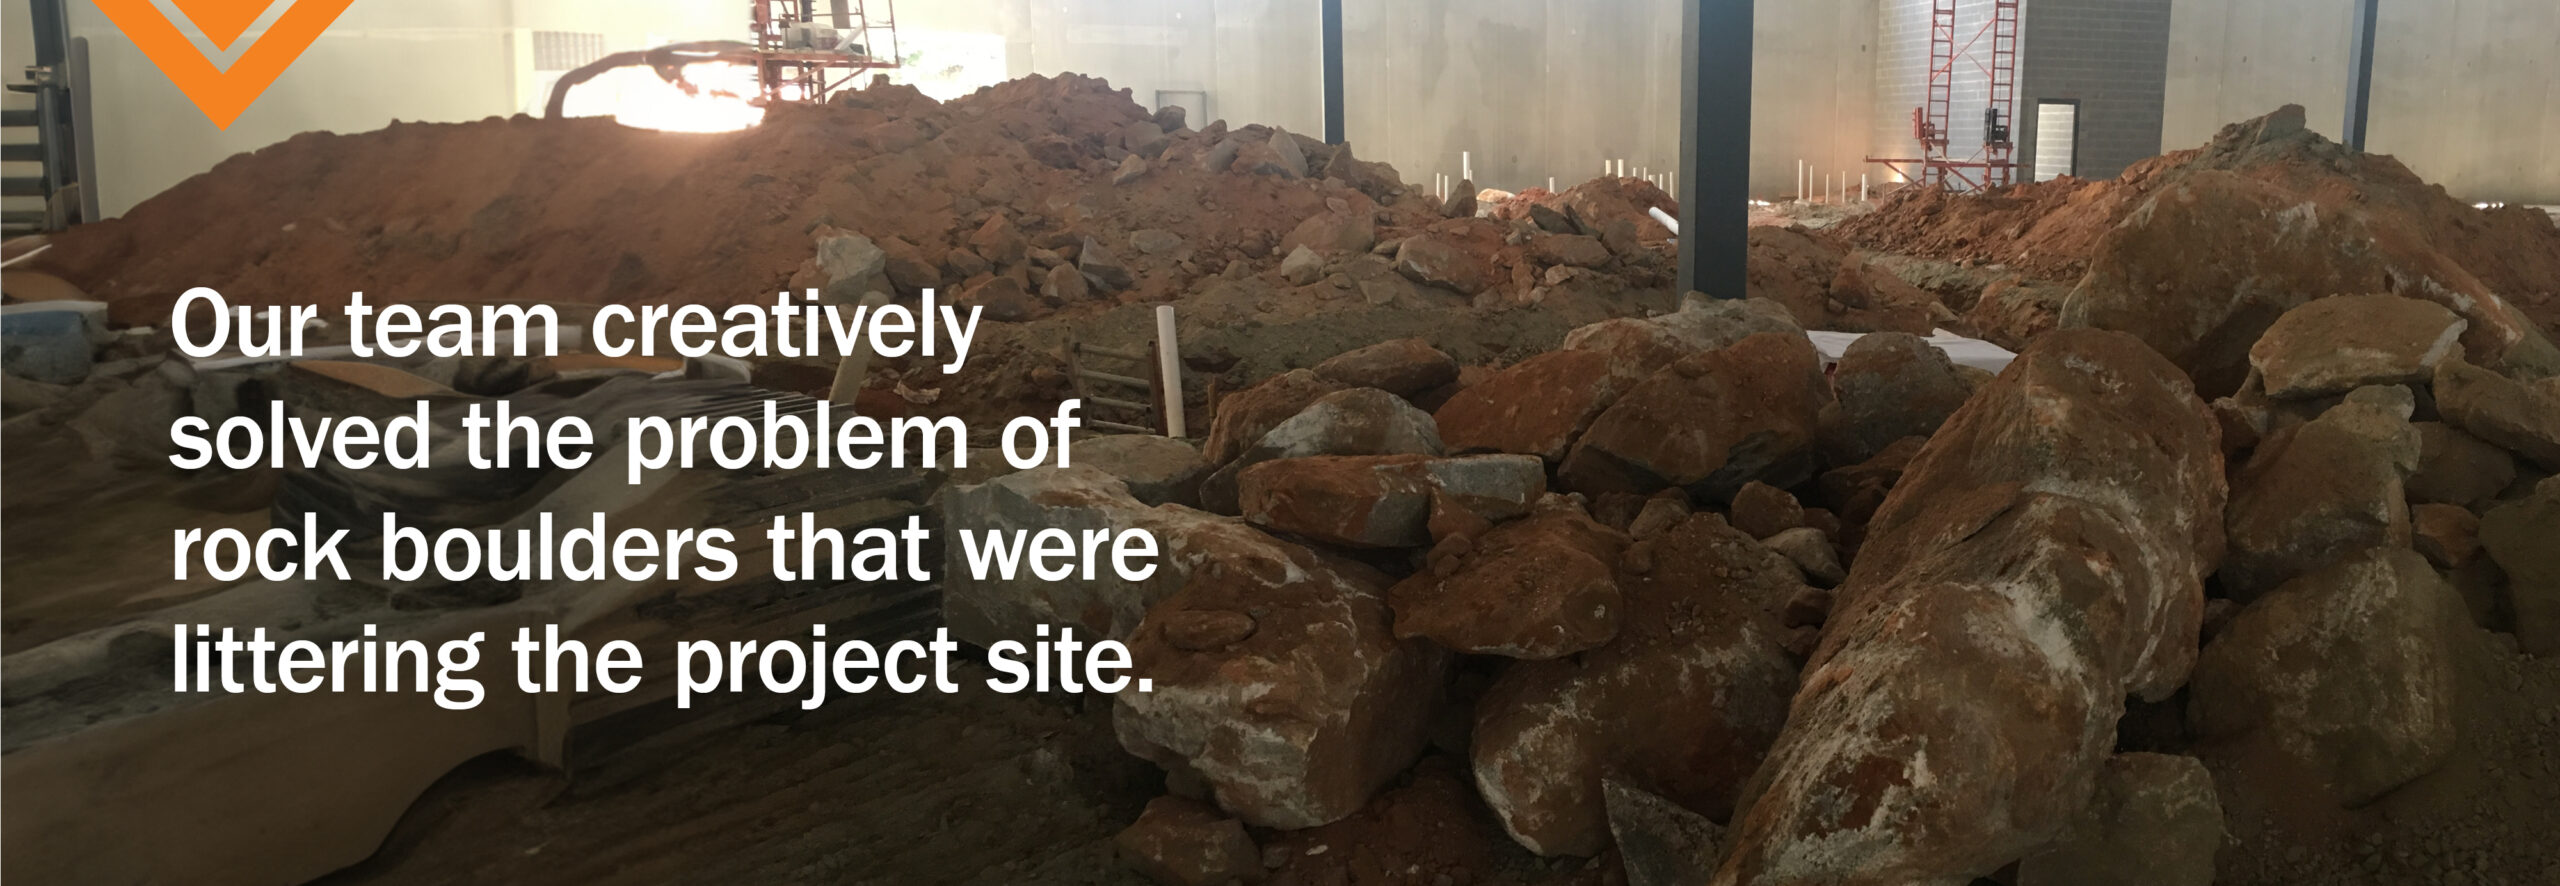 Design-Build Solutions: Our team creatively solved the problem of rock boulders that were littering the project site.